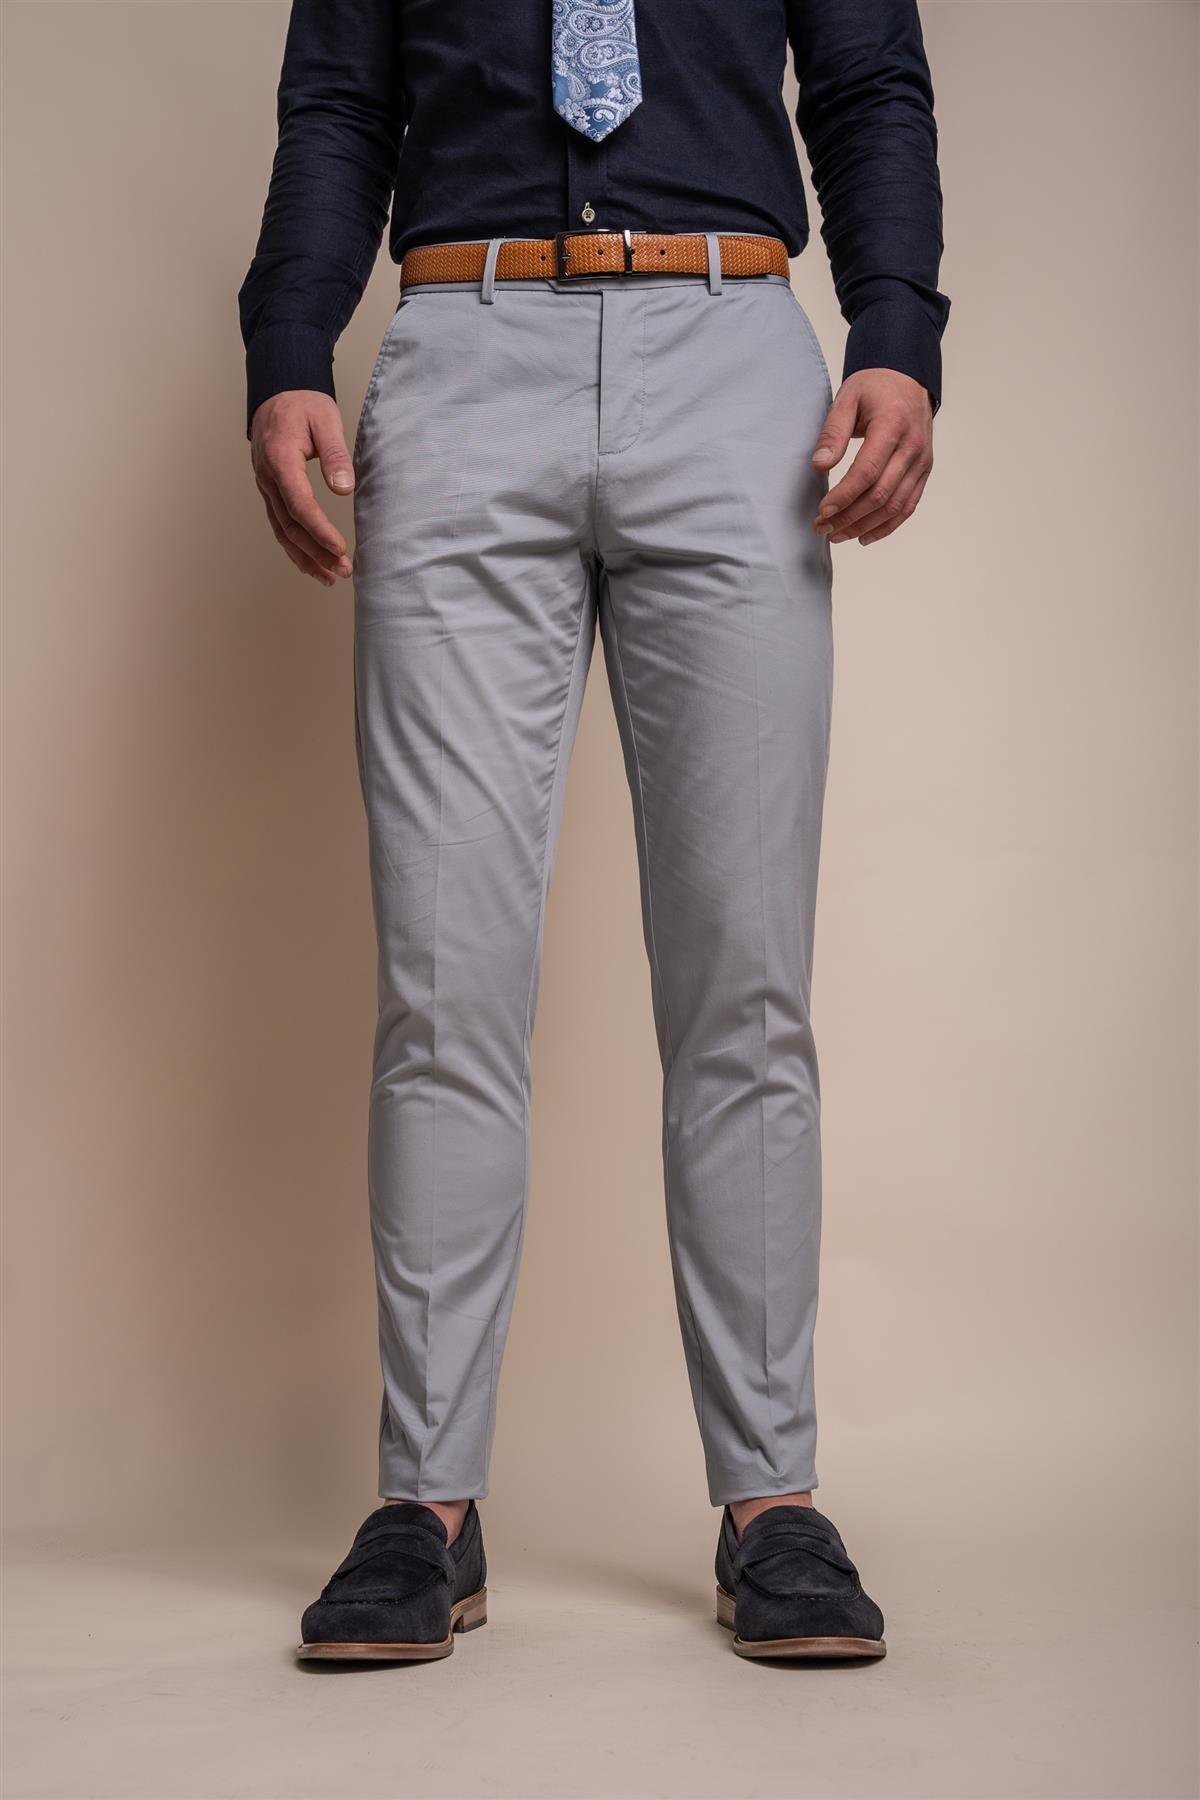 Mario ice blue trouser front